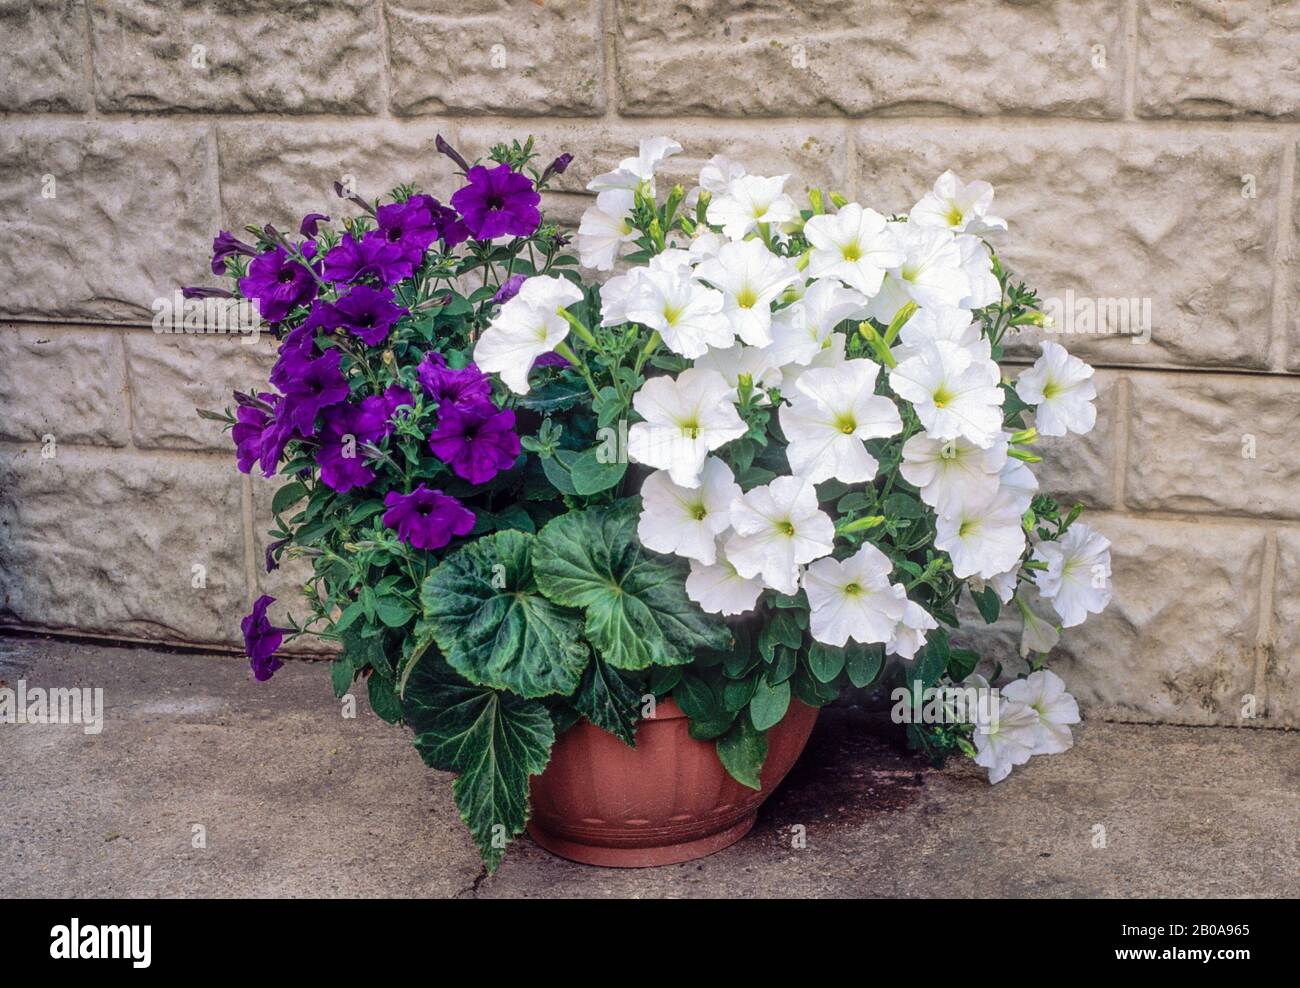 Mixed Petunias of purple and white growing in flower planter in summer. Ideal bedding, basket or container plant. Stock Photo